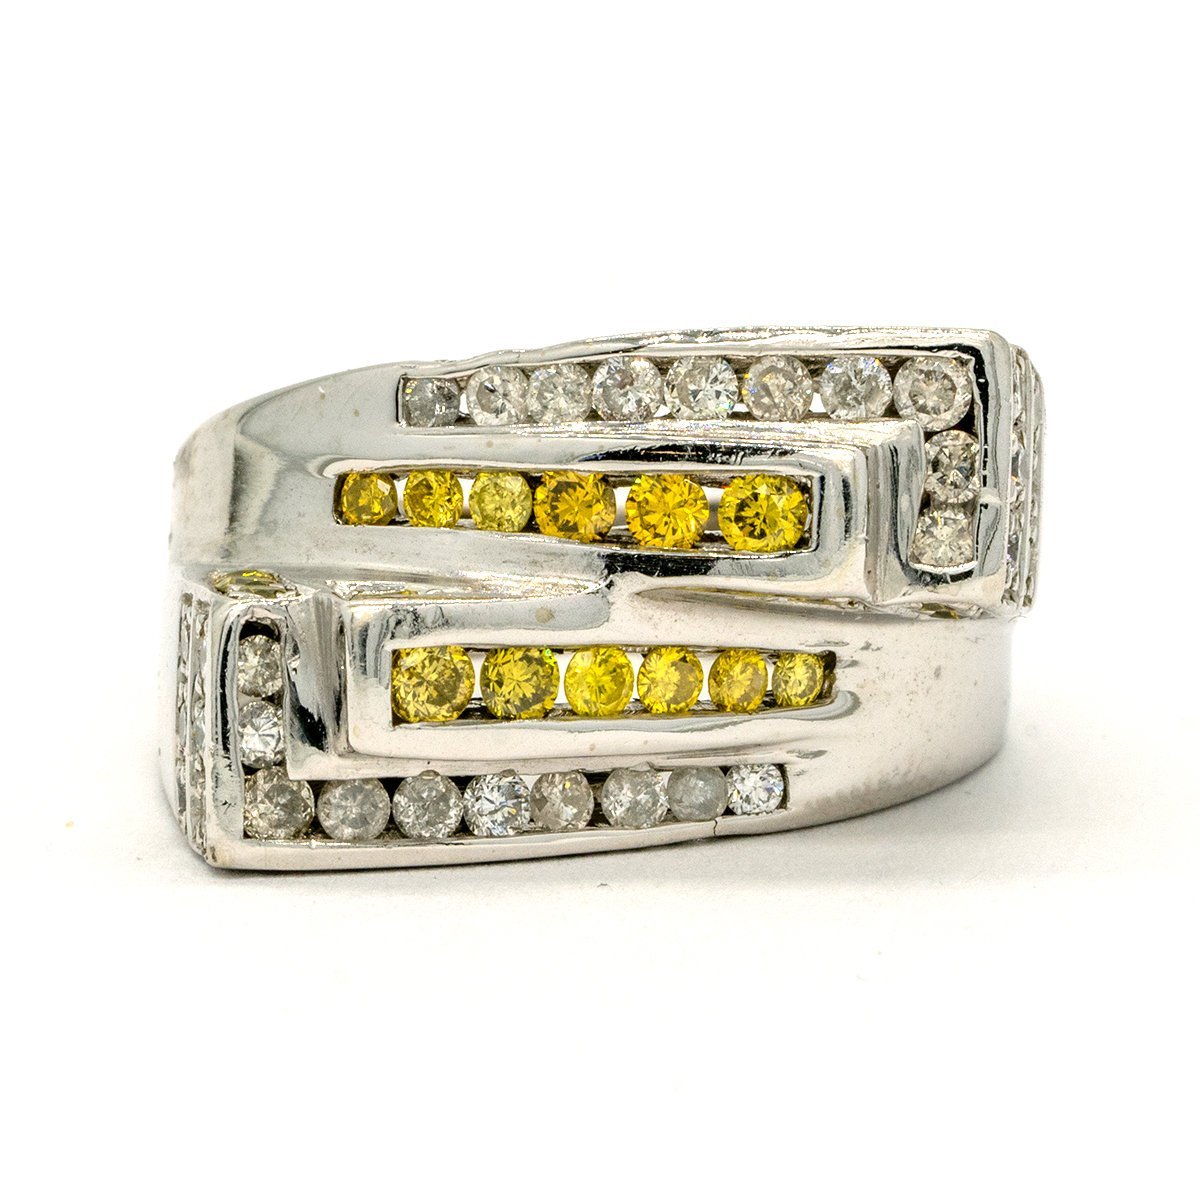 JDTK-GS2530052 Nelly and Hand Prong Set with Canary Yellow Diamond – Johnny  Dang & Co